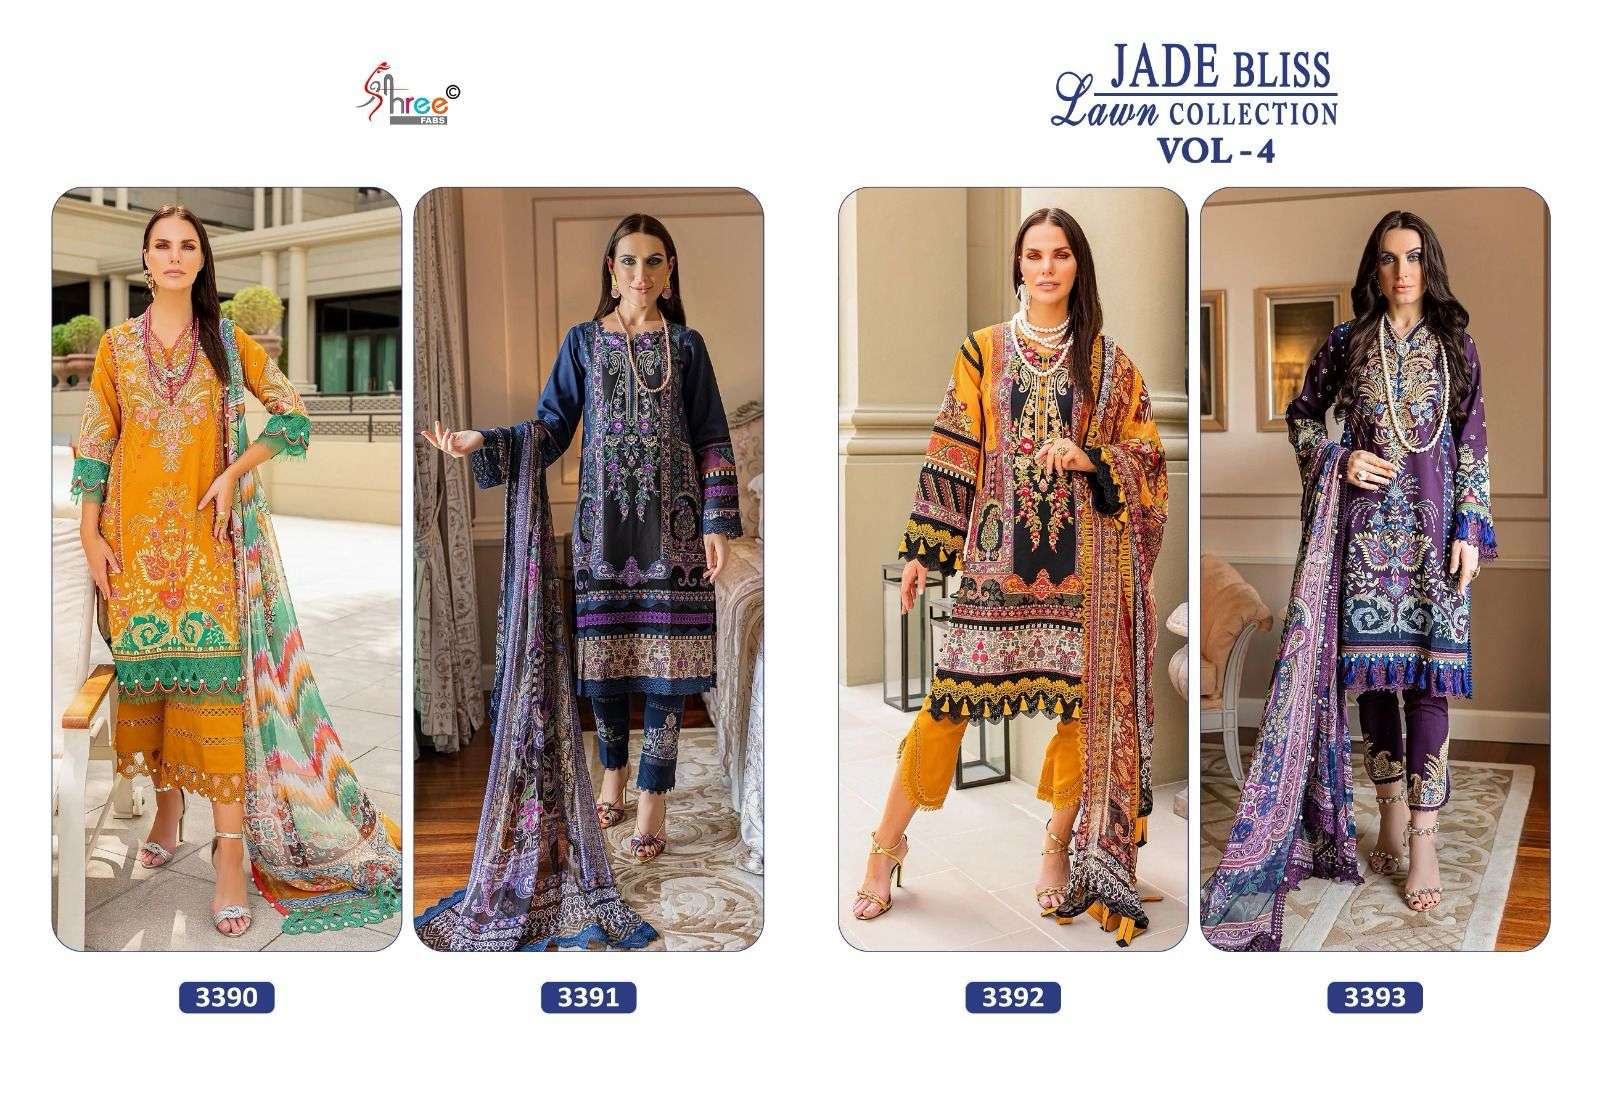 SHREE FABS JADE BLISS LAWN COLLECTION VOL 4